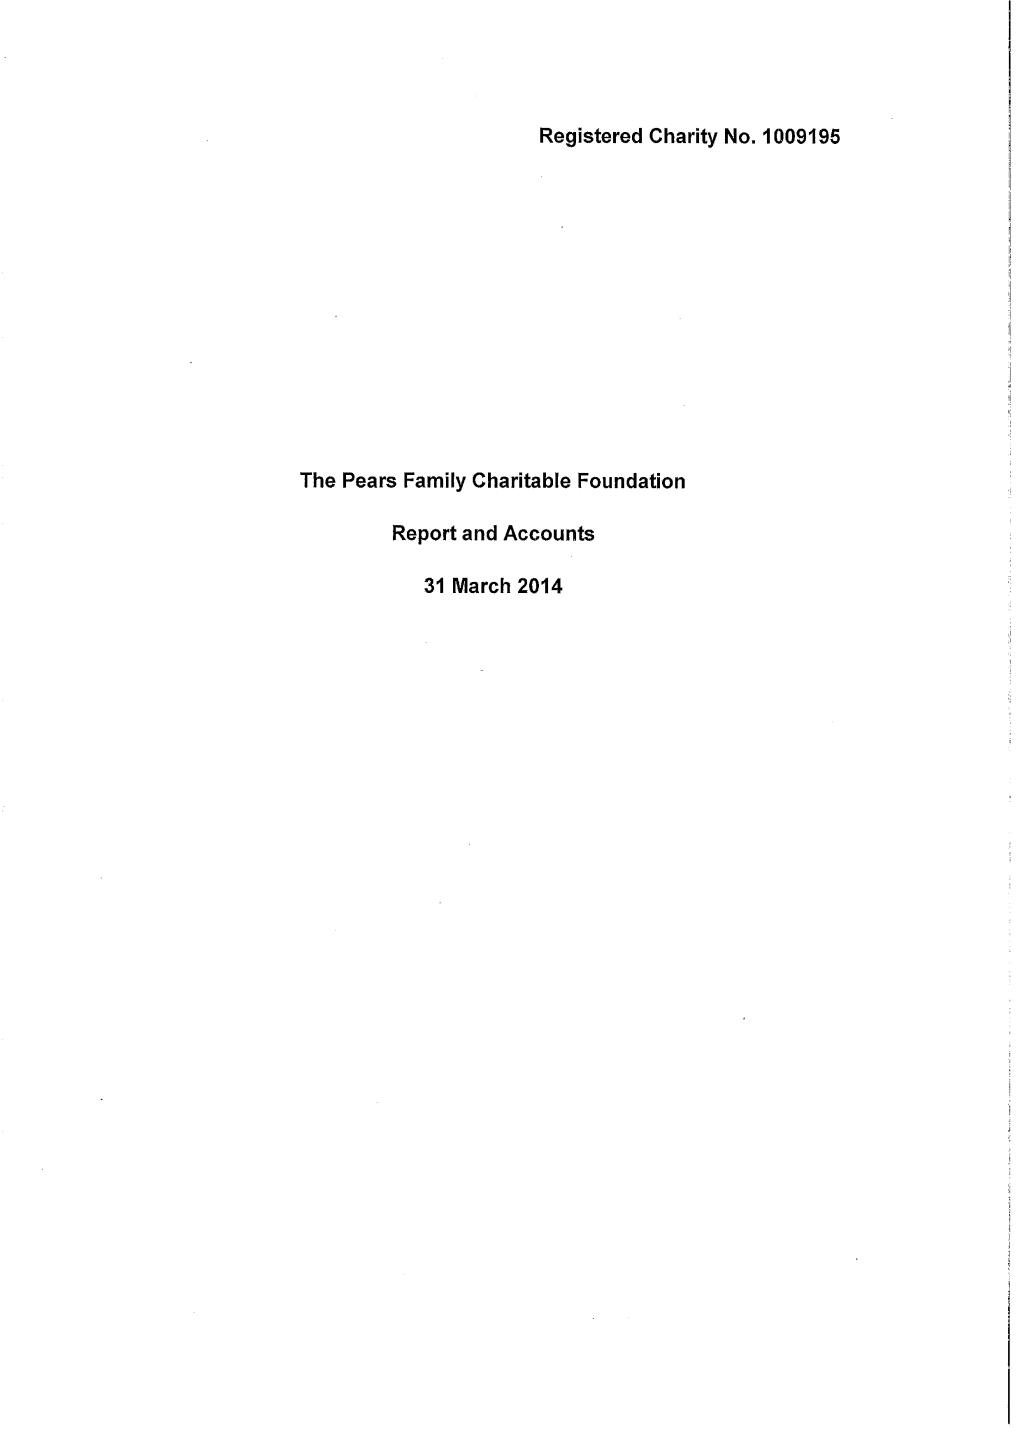 The Pears Family Charitable Foundation Report and Accounts